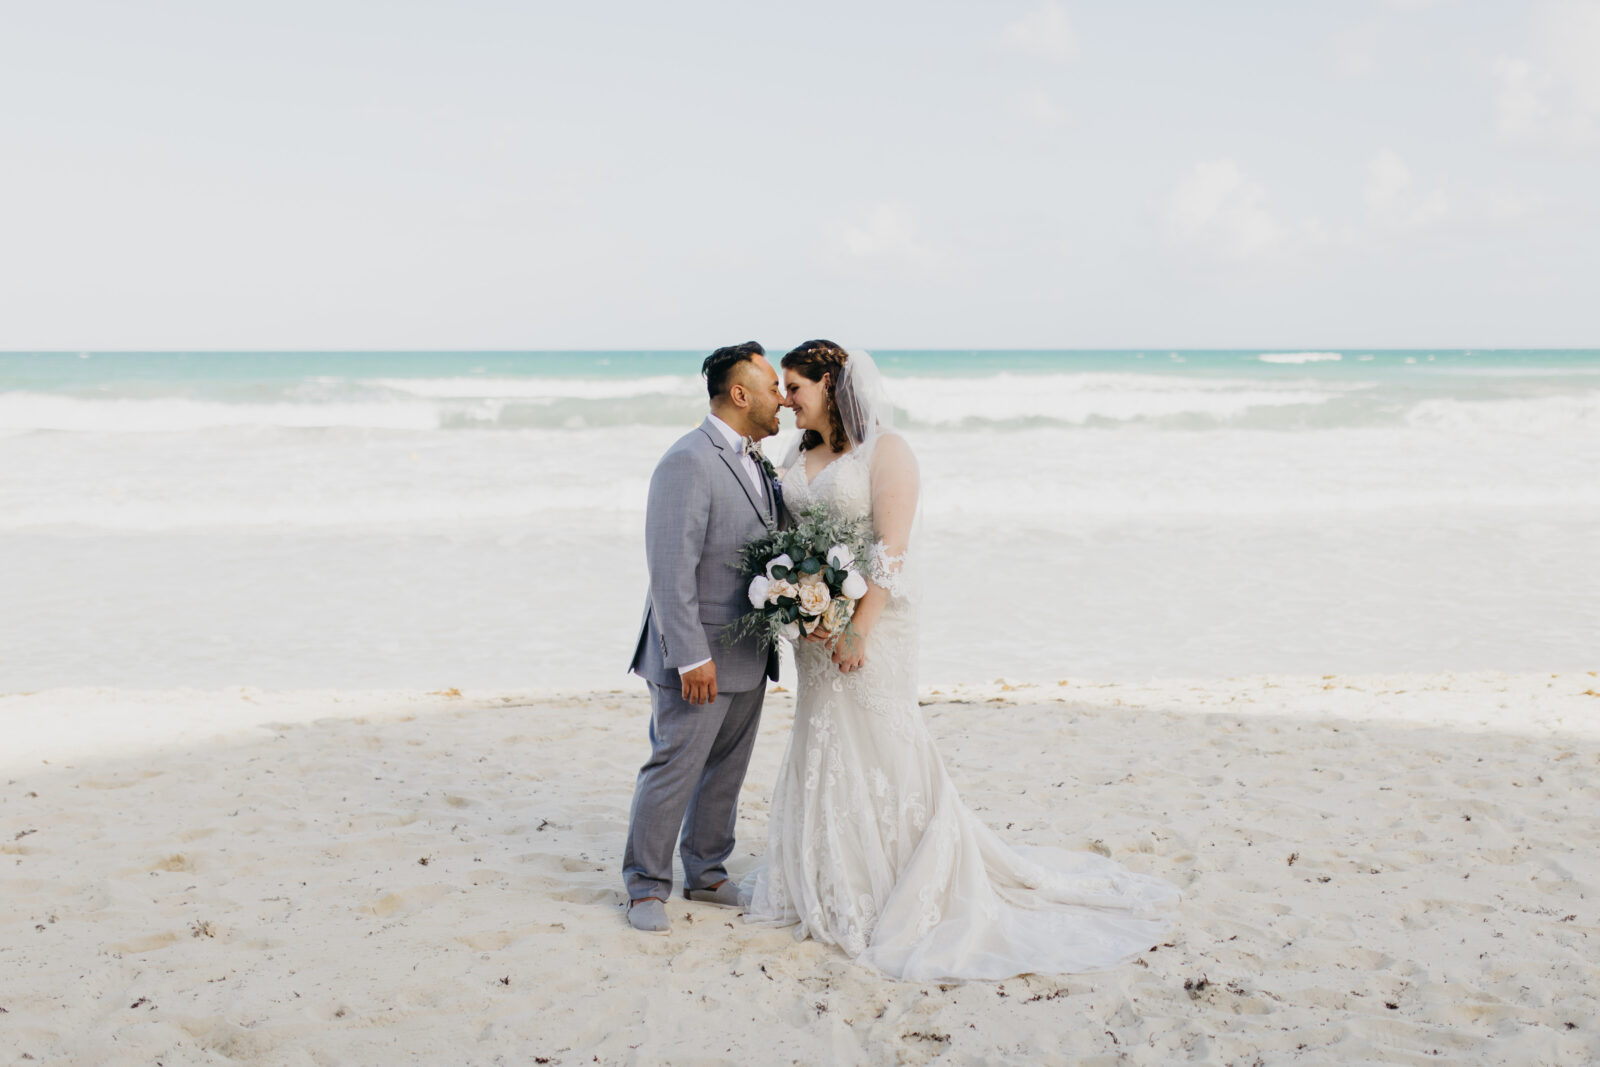 A lovely photo of the bride and groom by the beach in Playa del Carme